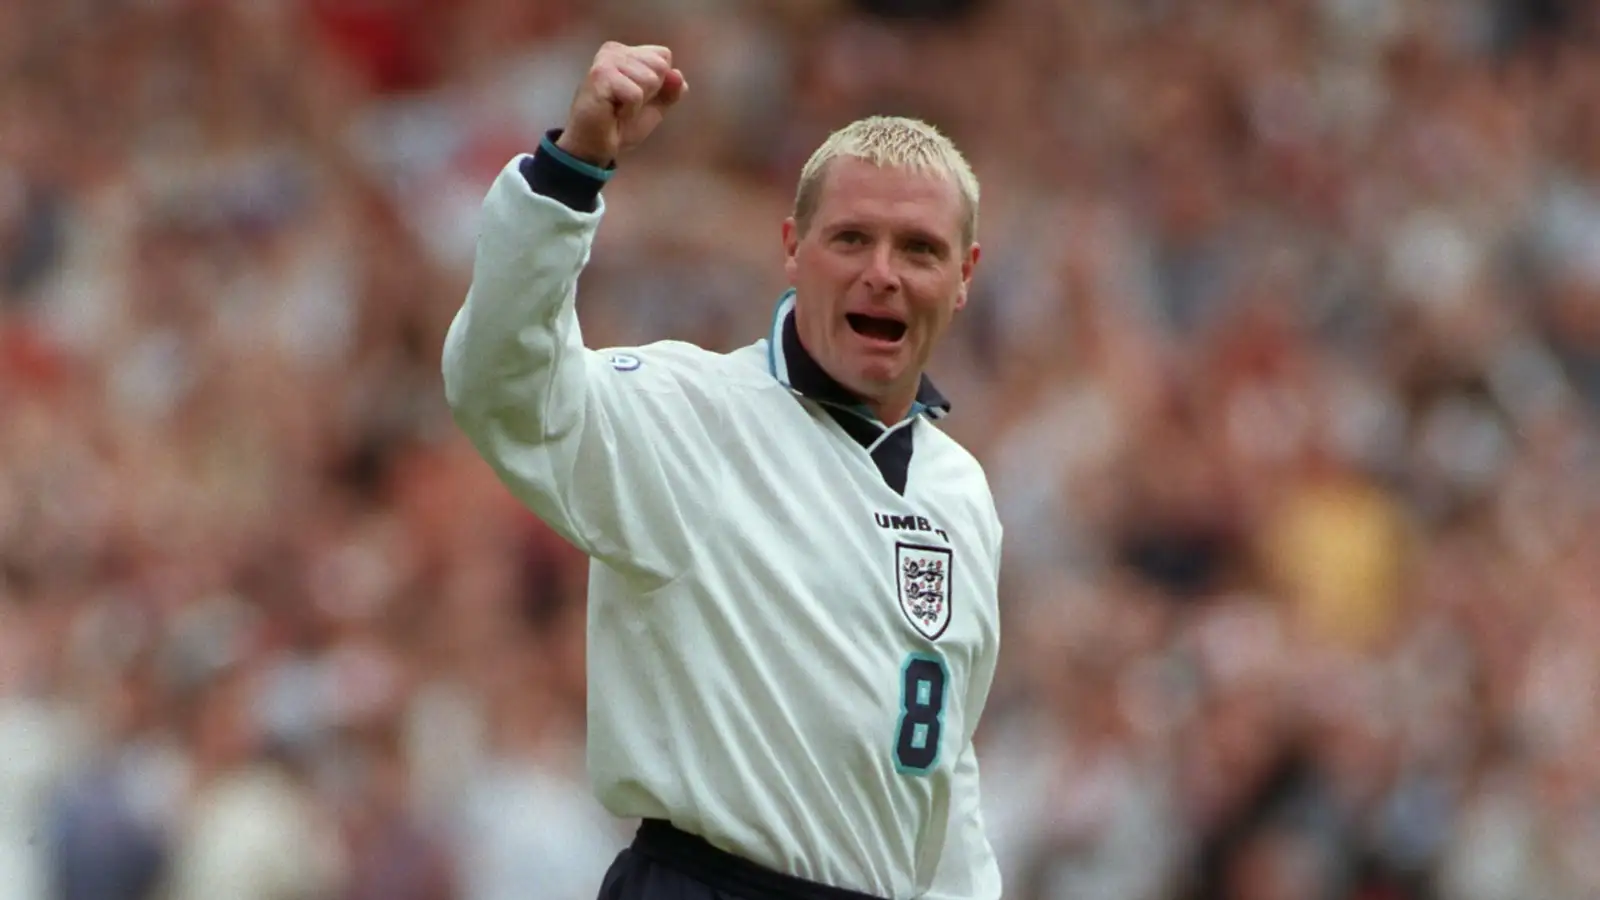 13 of the best stories about Gazza: Trout, yachts, pneumatic drills & more